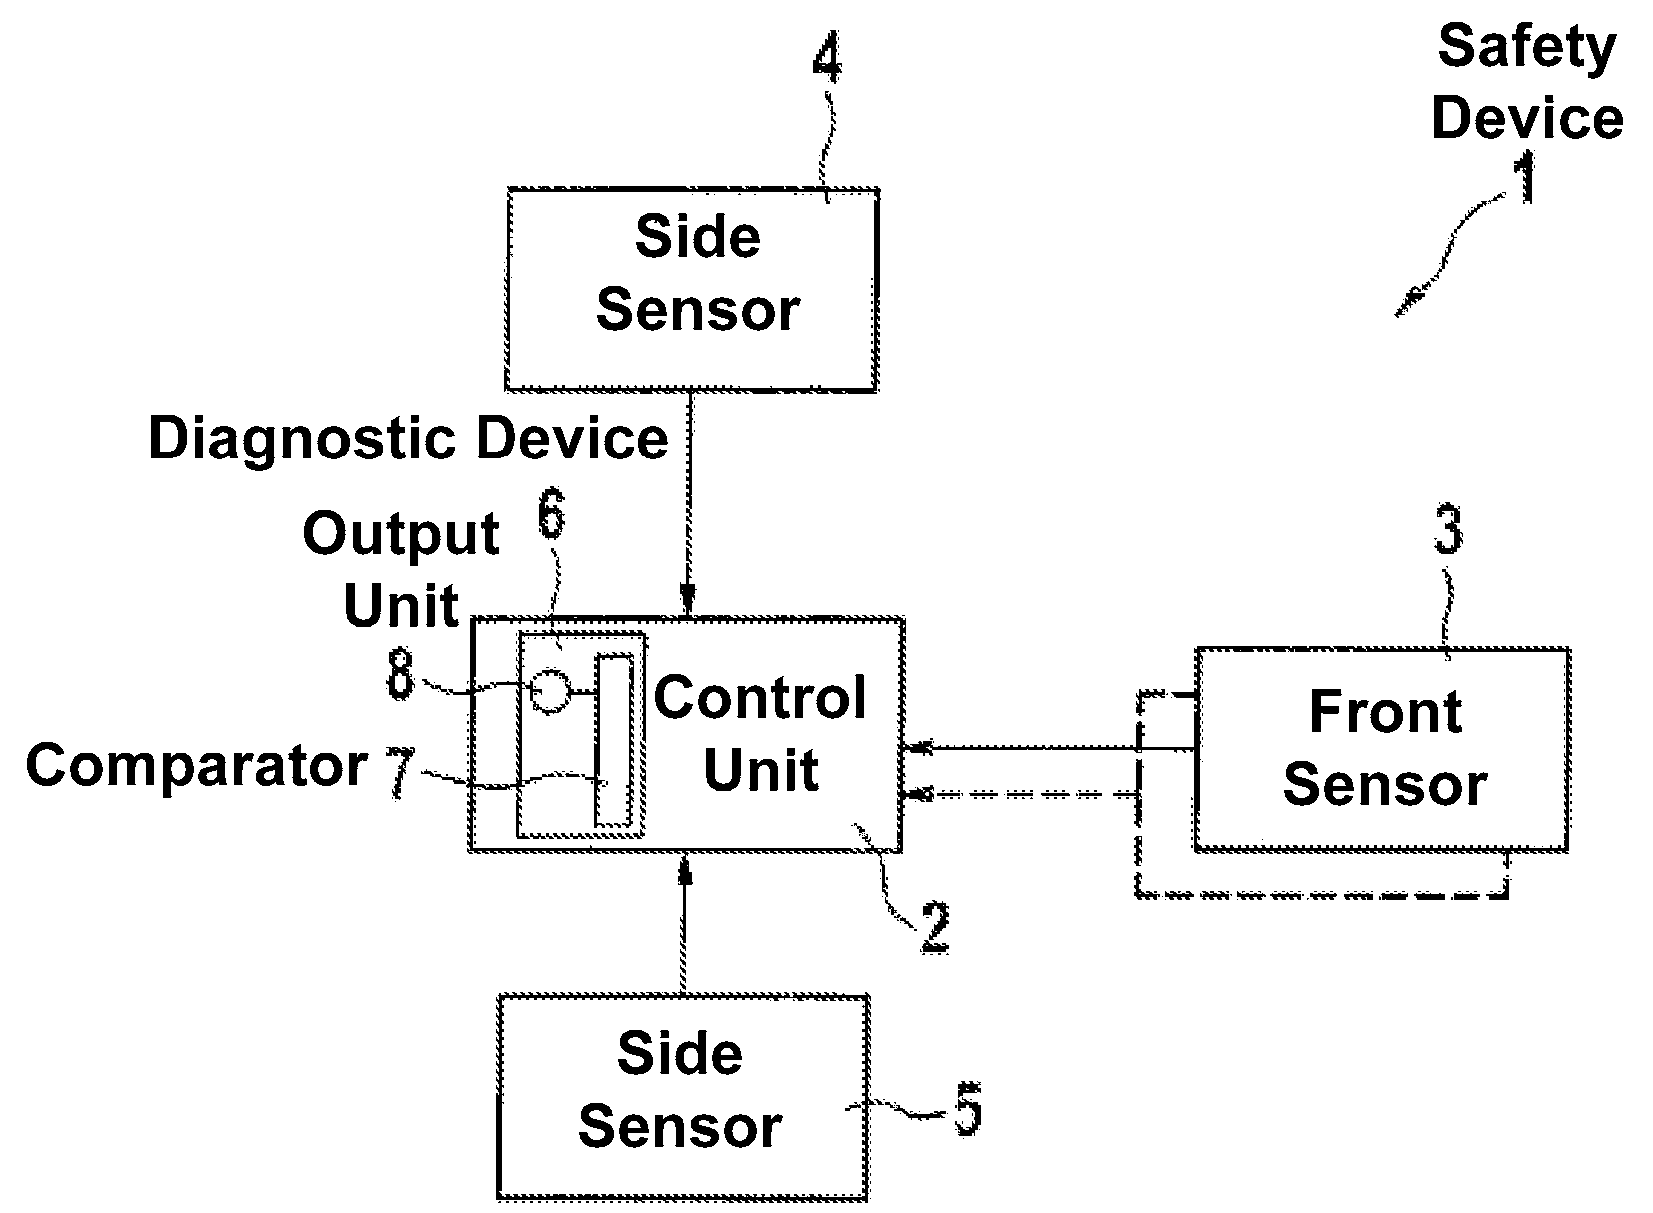 Method for monitoring the performance reliability of a control unit and diagnostic device